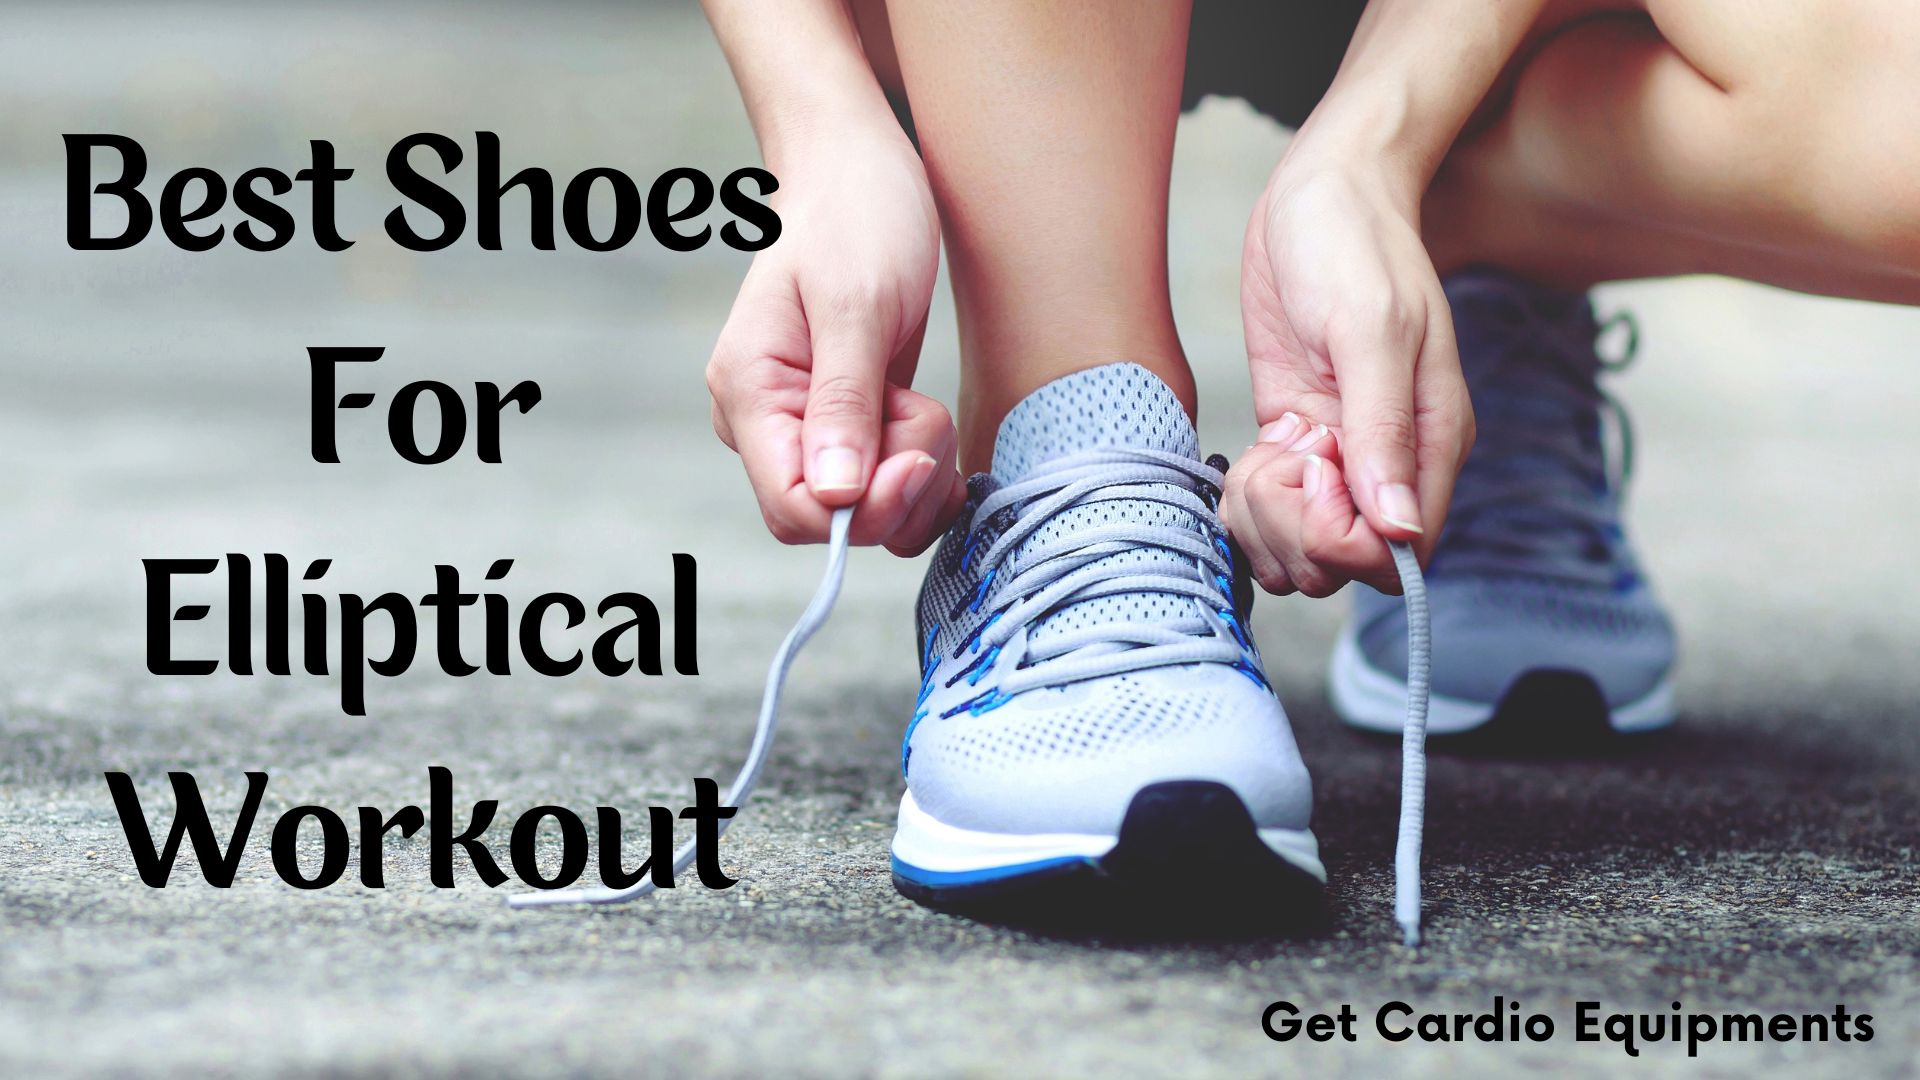 Best Shoes for Elliptical Workouts: Top 10 Picks and Buying Guide